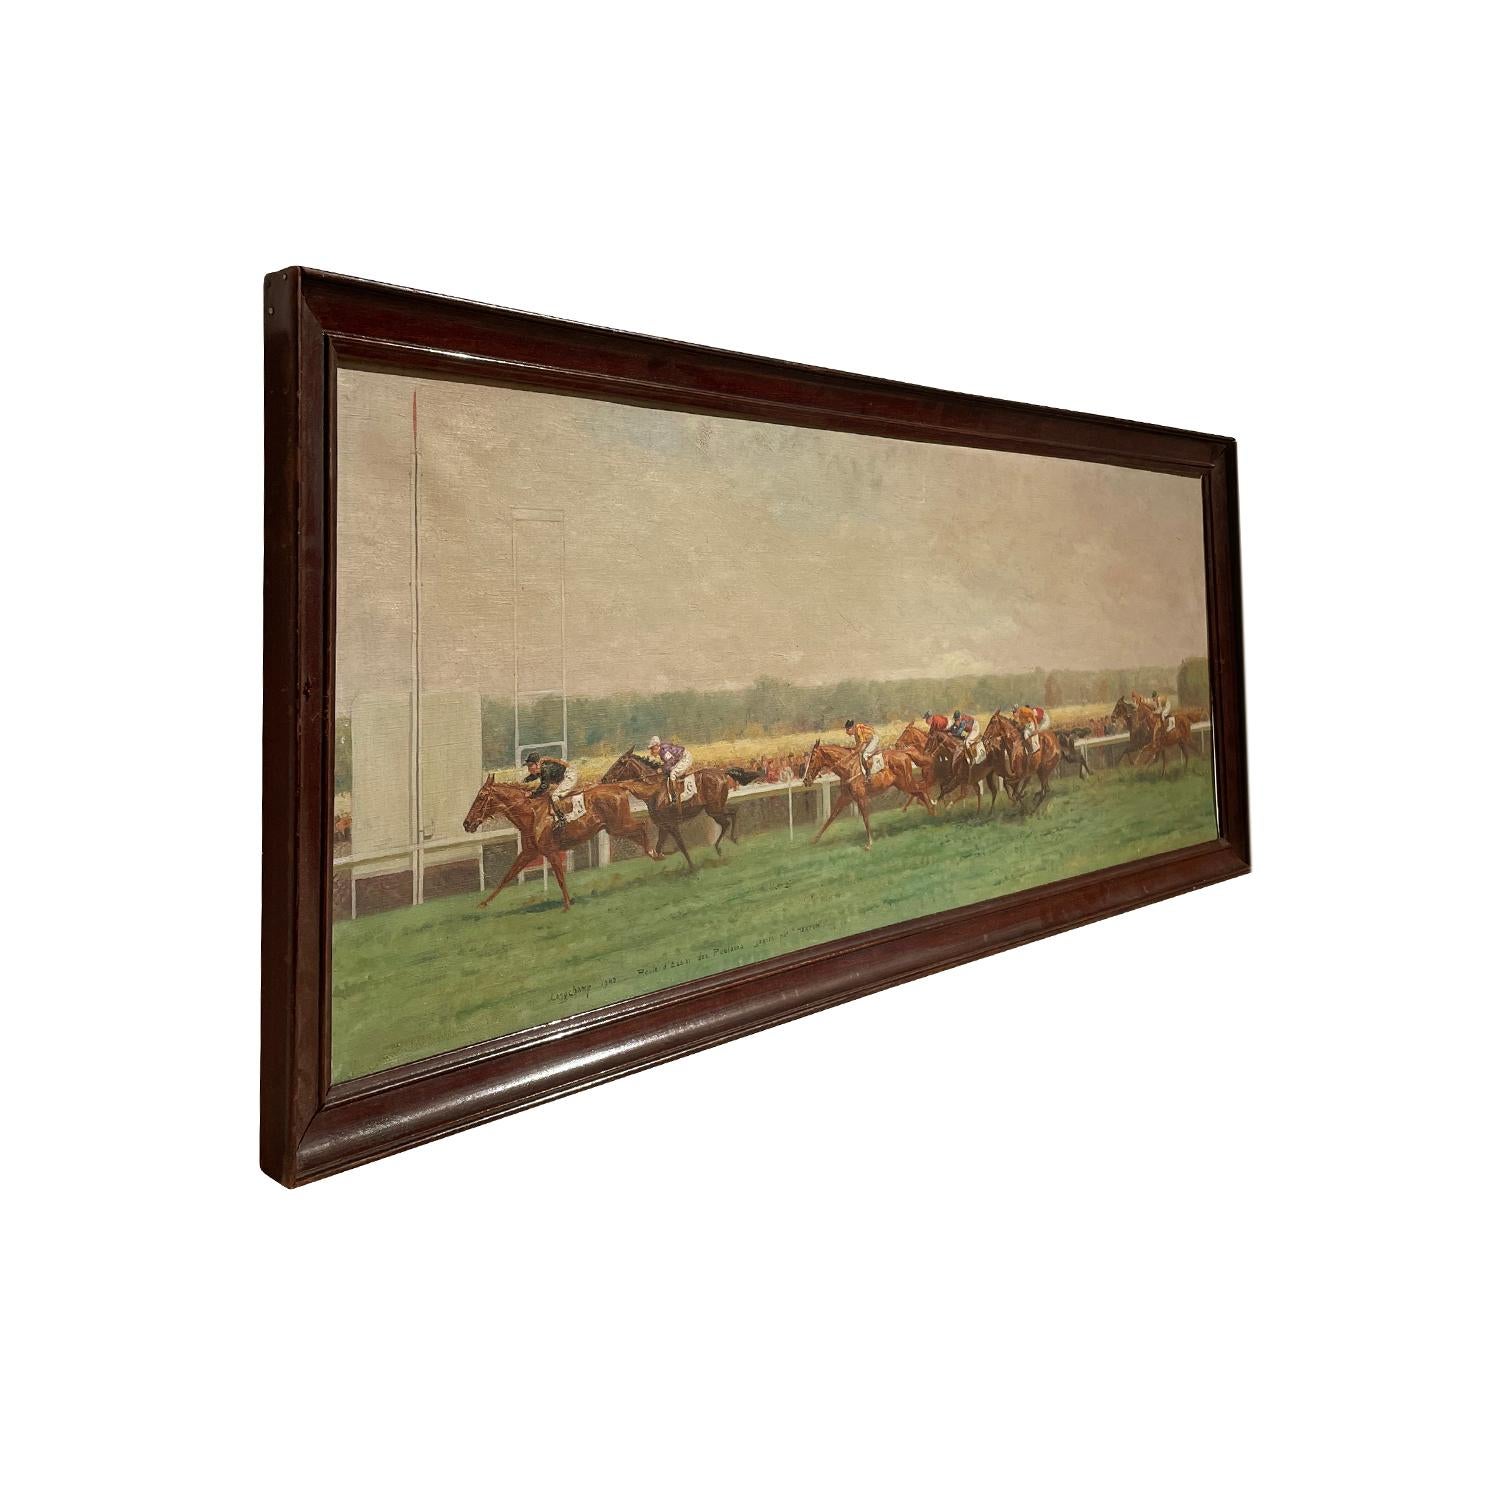 A green-brown, vintage Art Deco French oil on canvas painting of a slightly cloudy, sunny day at the Longchamp horse racing track, painted by Eugène Pechaubes in the original wooden frame, in good condition. The Parisian painting depicts nine horse